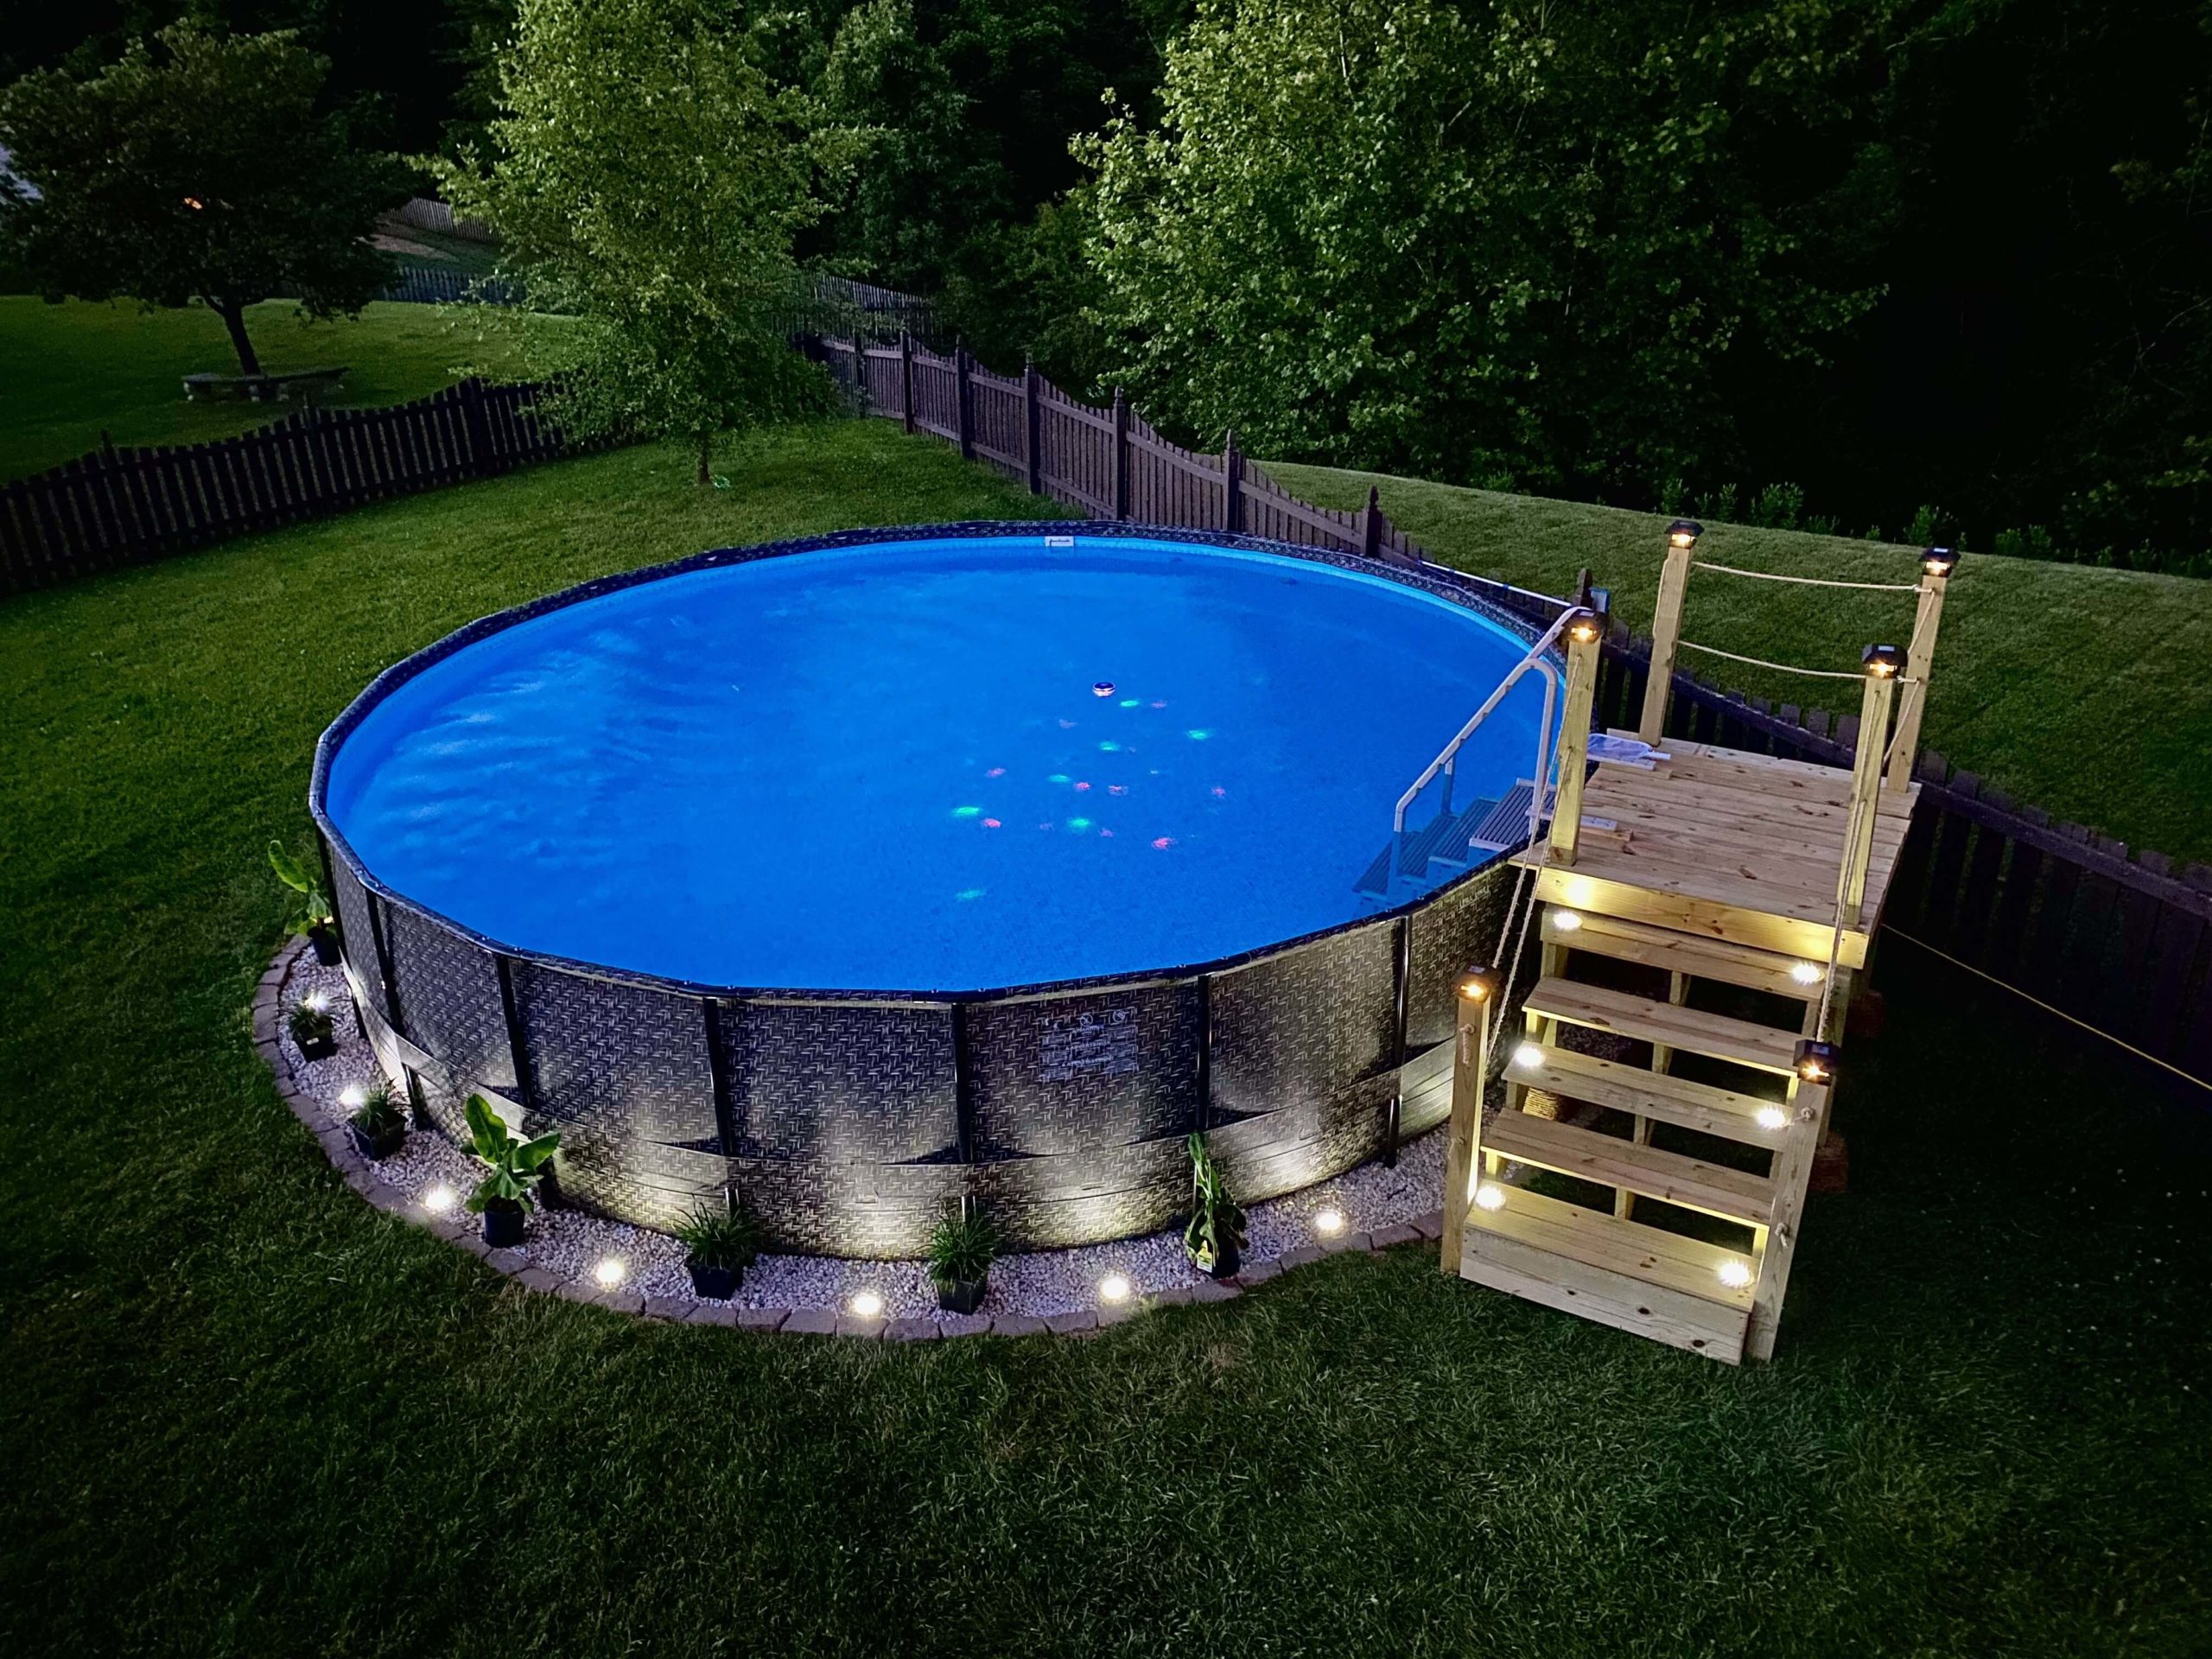 Pools to Install in Your Garden Without Doing Any Works or Excavation